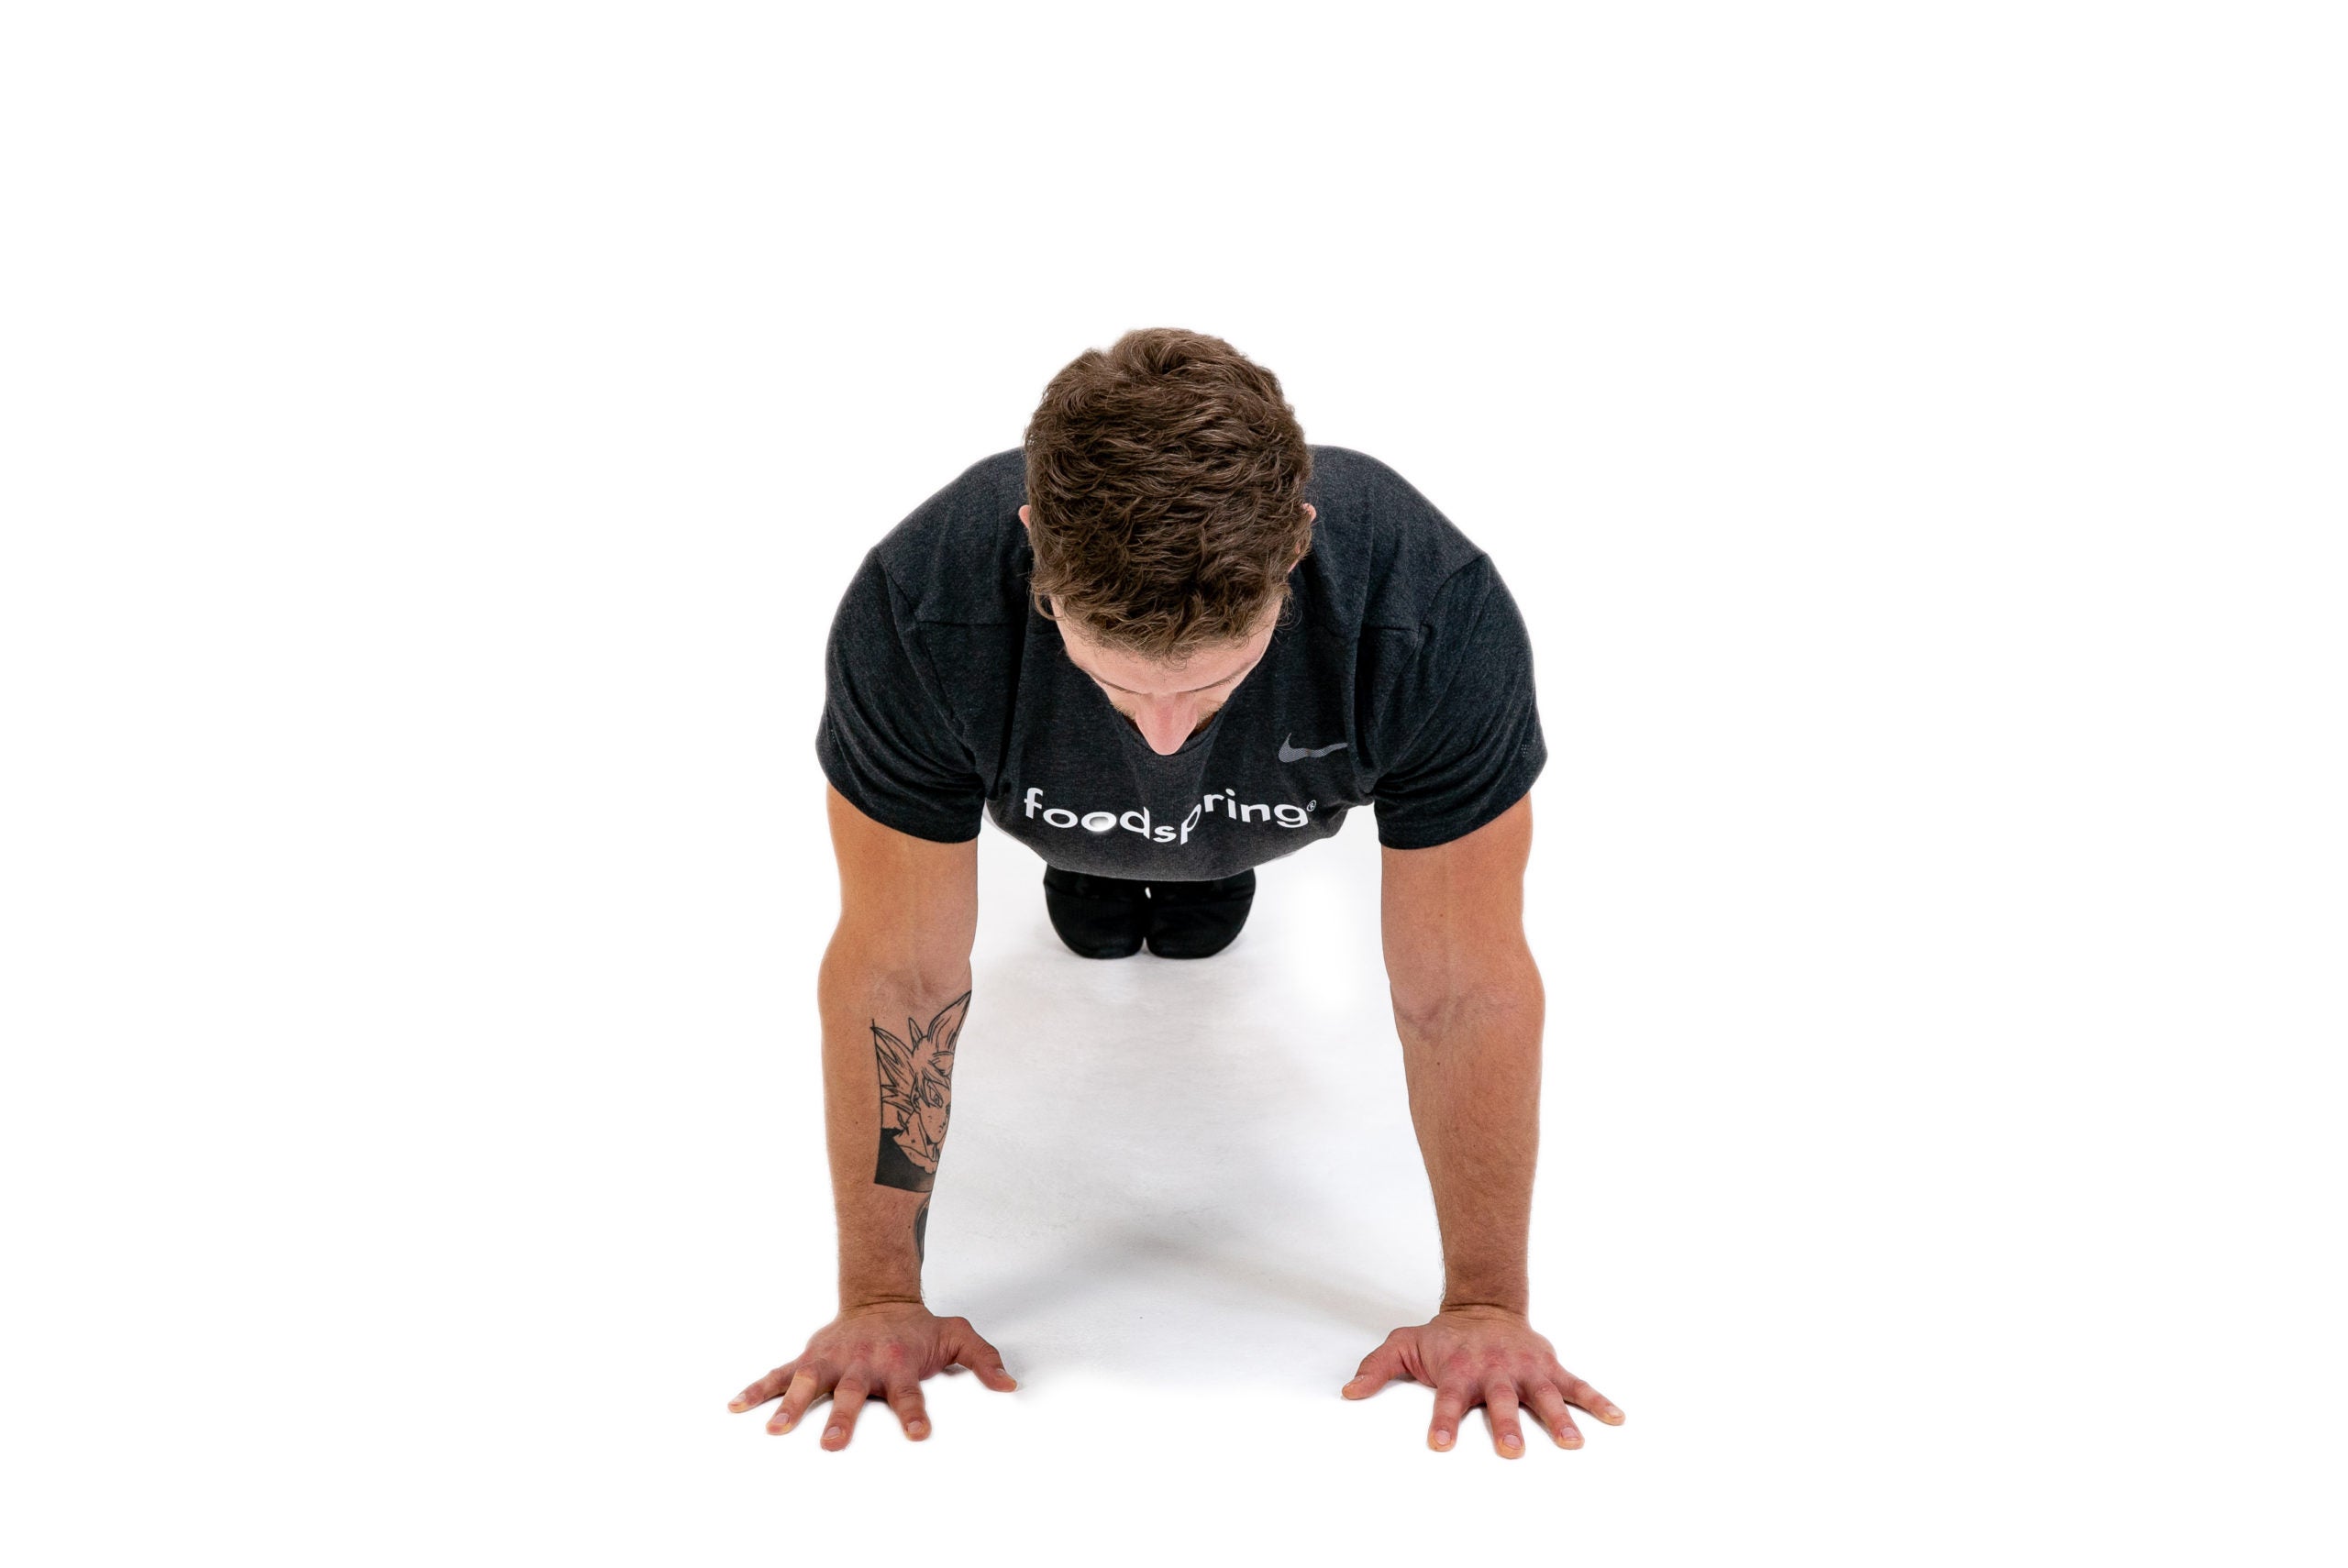 A white athlete performs a close-grip push-up